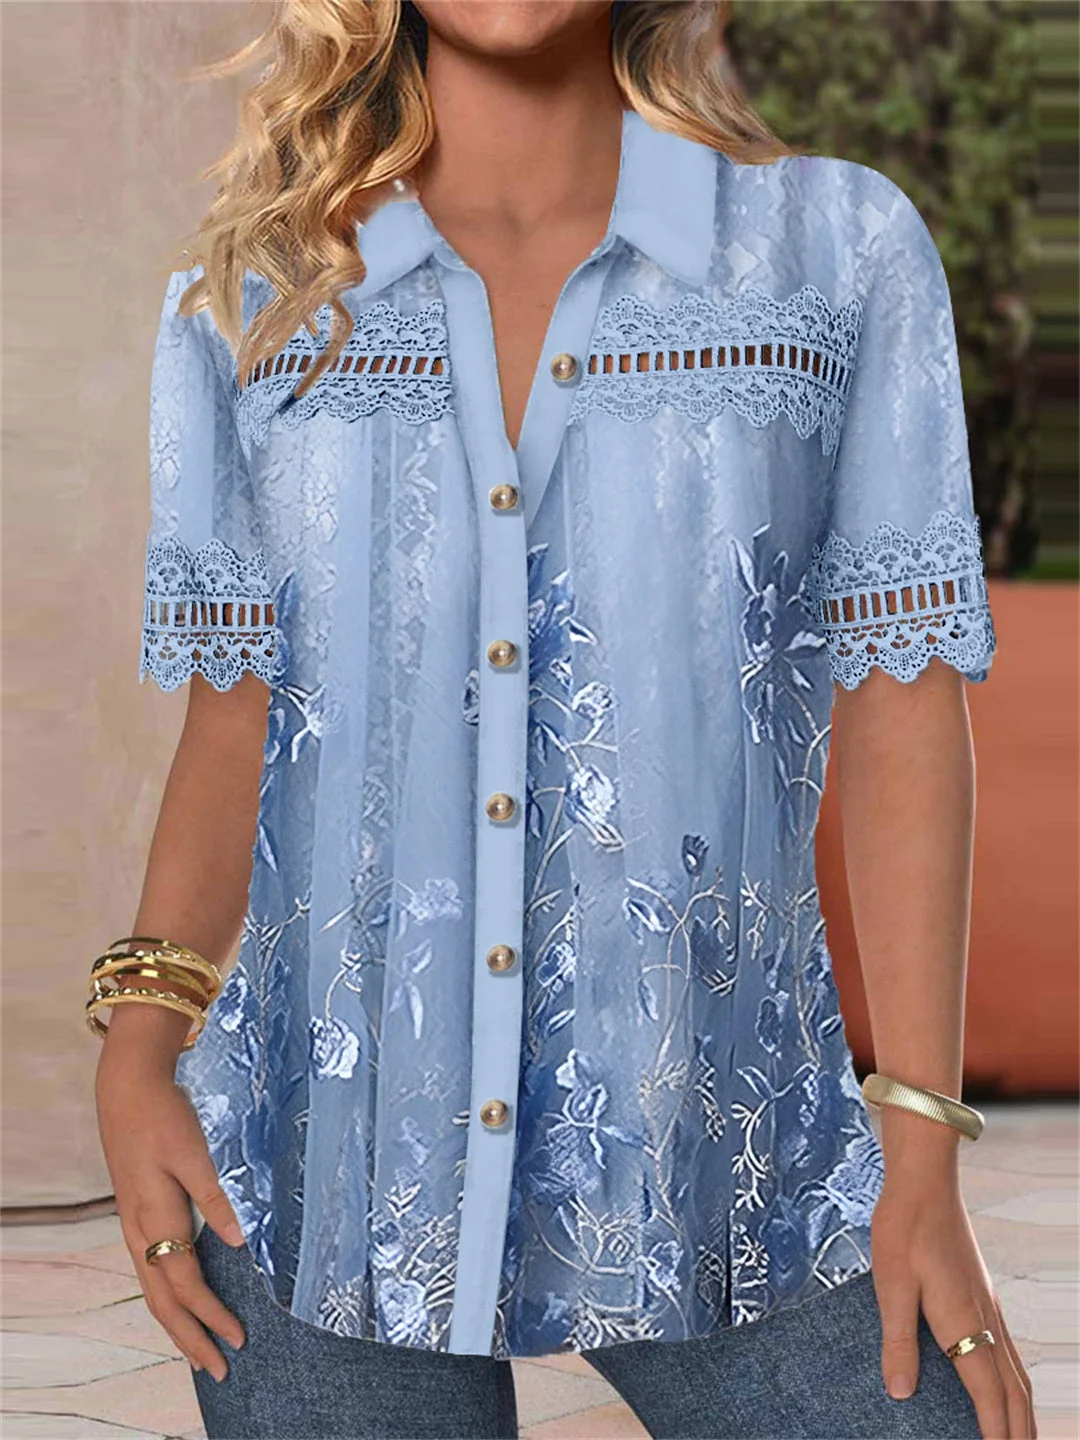 Women's Short Sleeve V-neck Lace Stitching Hollow Graphic Top